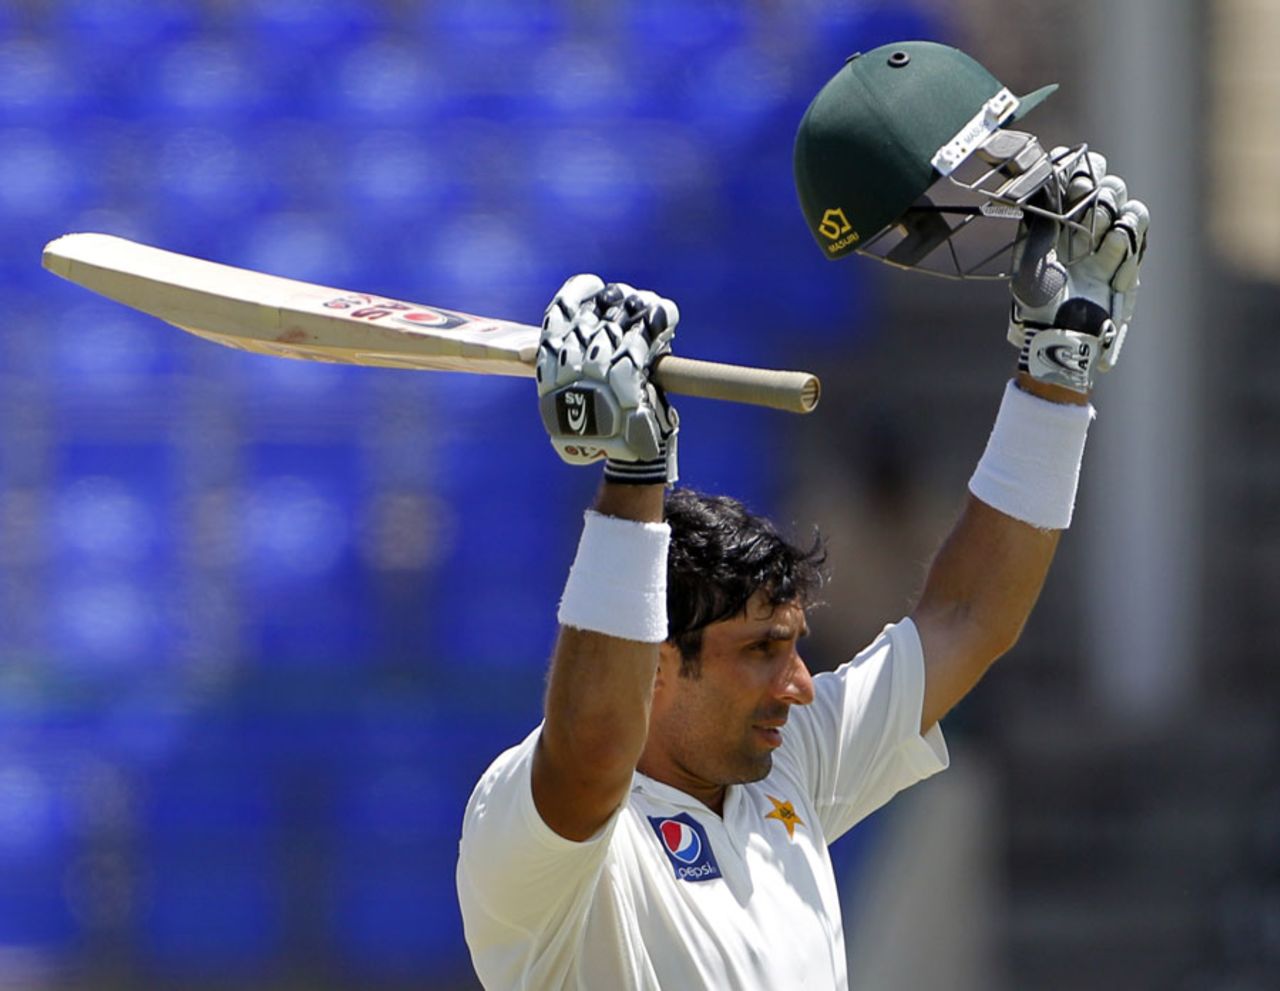 Misbah-ul-Haq's acknowledges the applause on getting to his ton, West Indies v Pakistan, 2nd Test, St Kitts, 4th day, May 23, 2011